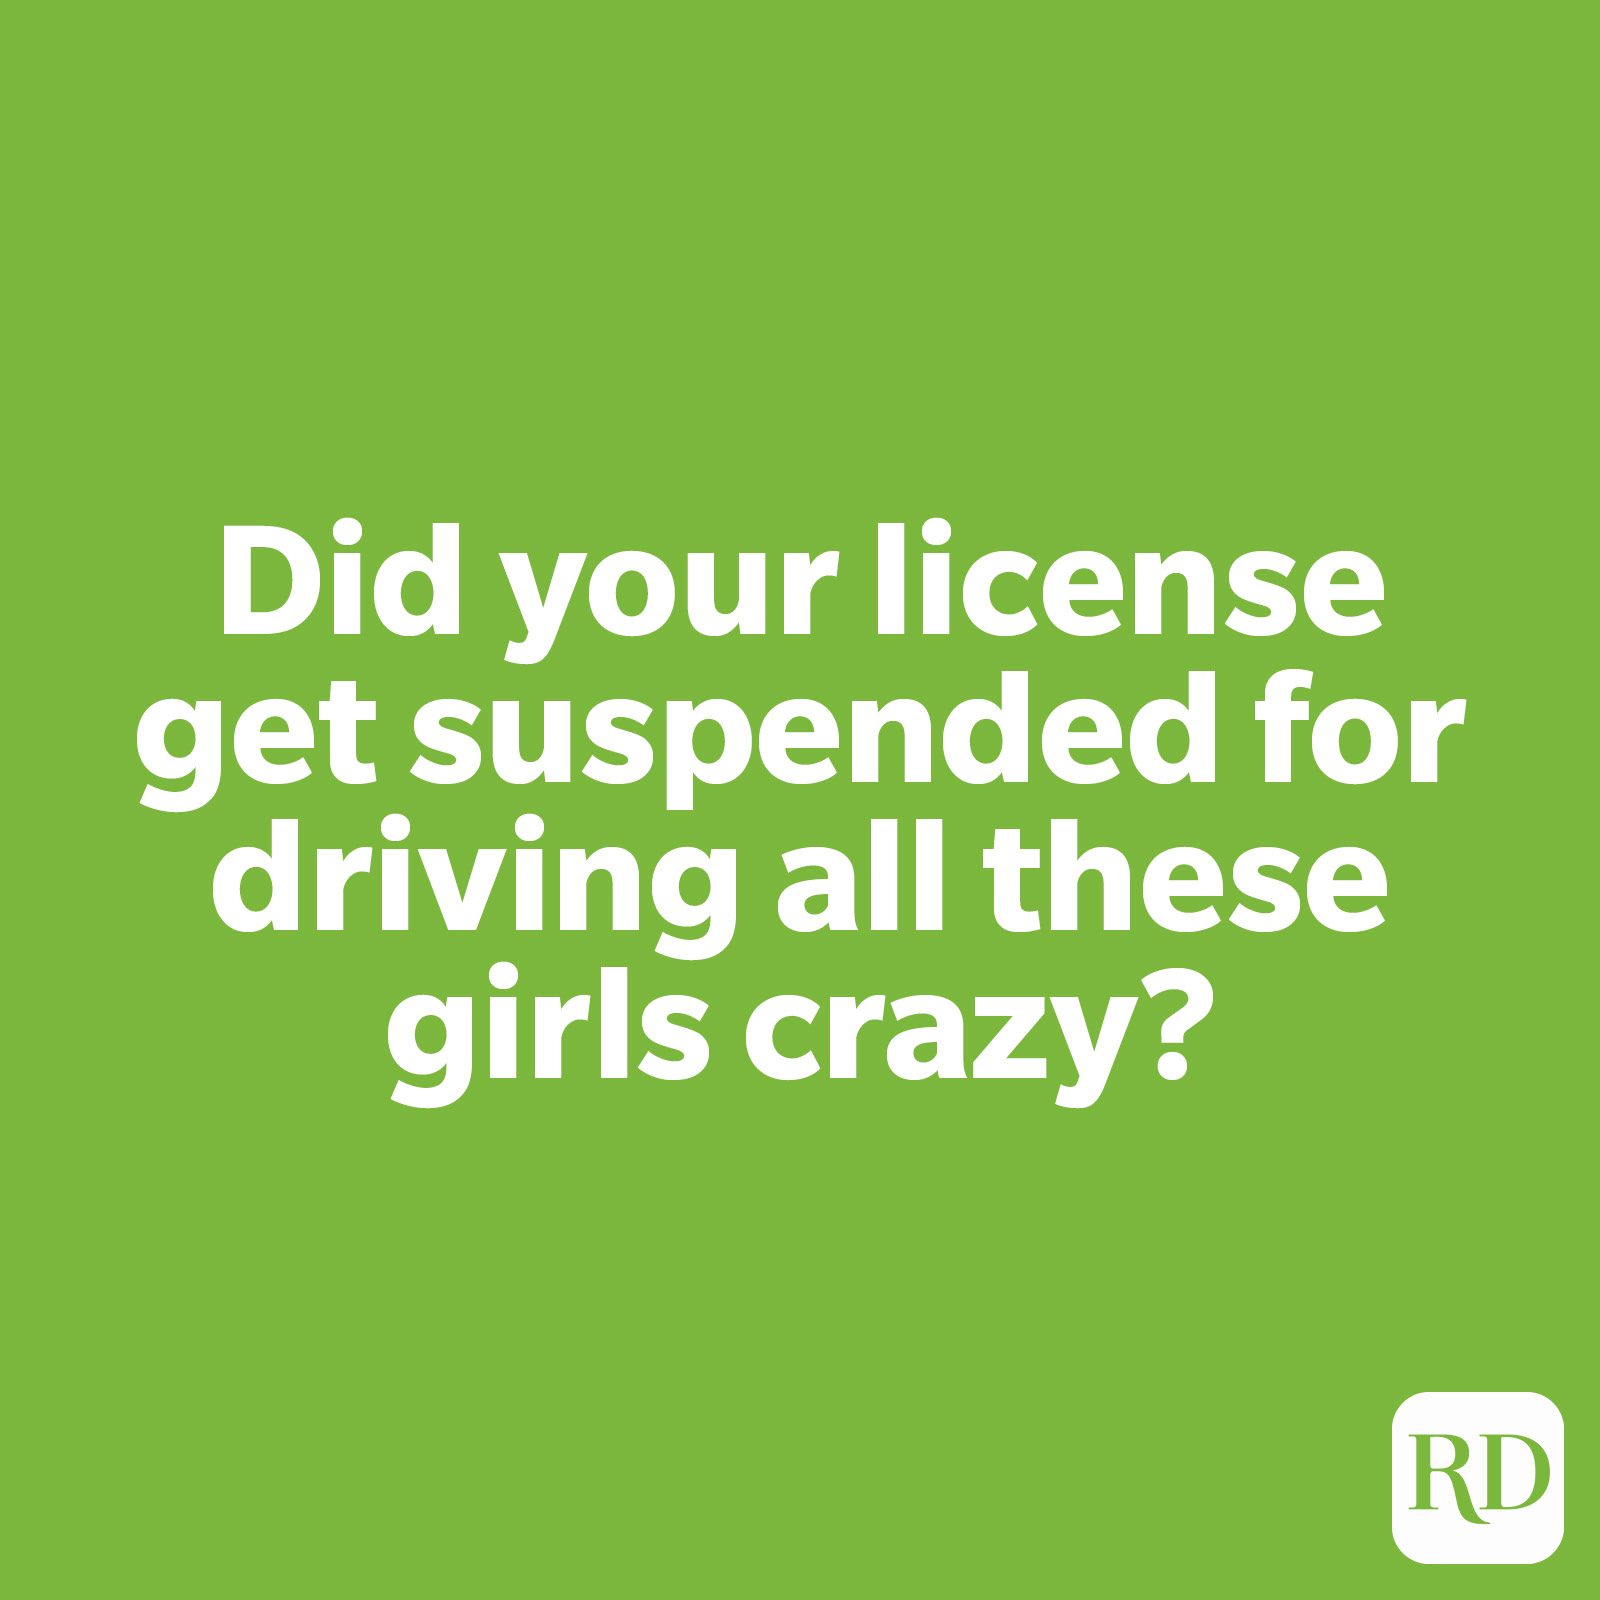 Did your license get suspended for driving all these girls crazy?